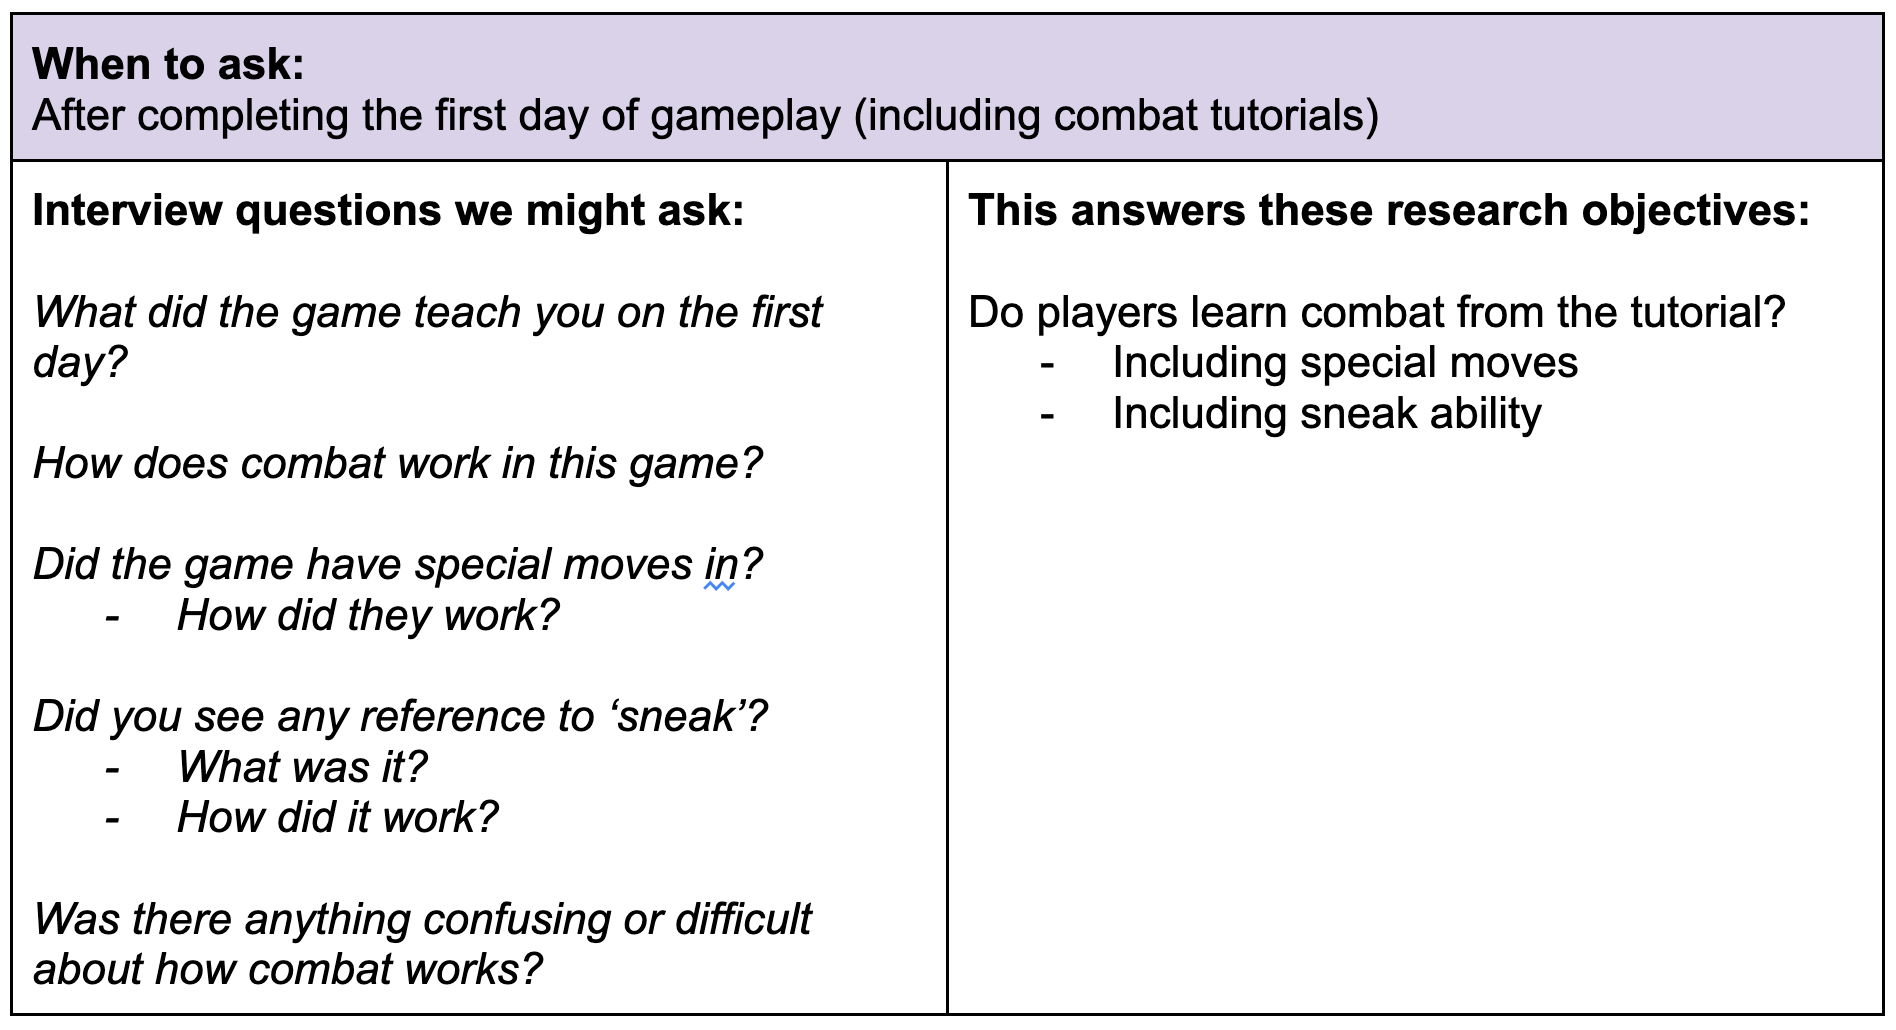 When to ask: After completing the first day of gameplay (including combat tutorials)Interview questions we might ask:  What did the game teach you on the first day?  How does combat work in this game?  Did the game have special moves in? How did they work?  Did you see any reference to ‘sneak’? What was it? How did it work?  Was there anything confusing or difficult about how combat works?This answers these research objectives:  Do players learn combat from the tutorial? Including special moves Including sneak ability